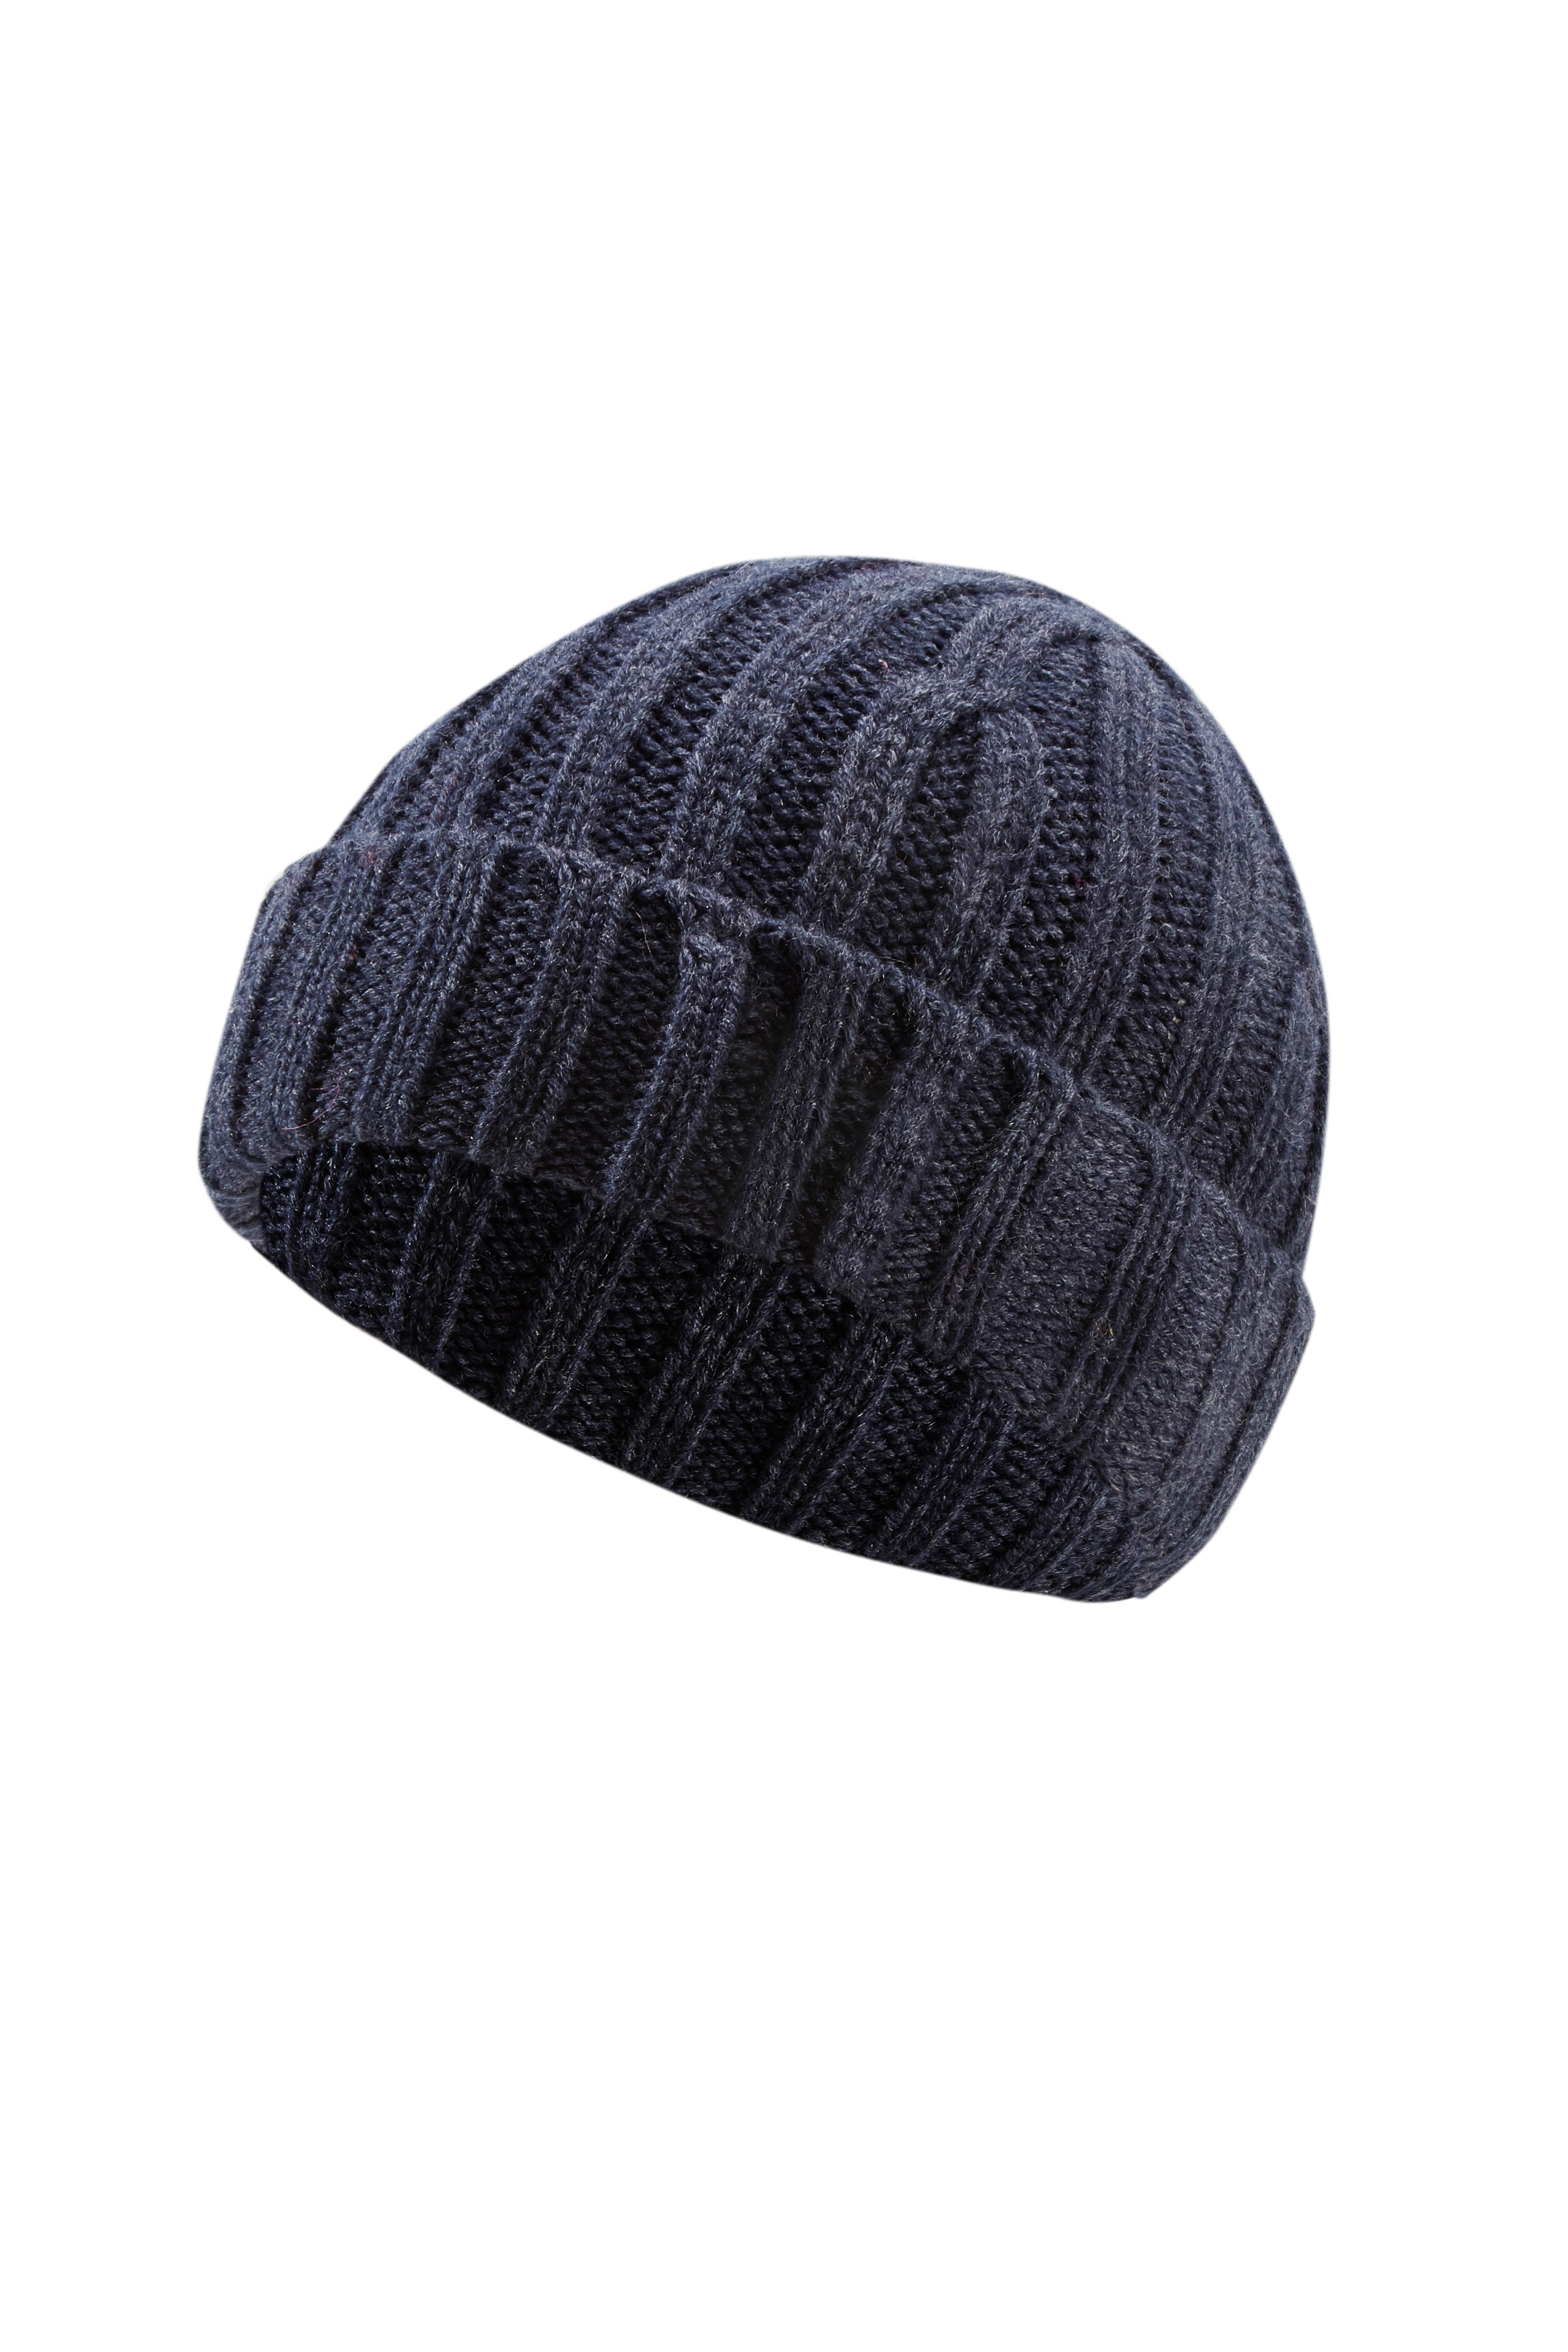 Boy's Winter Thick Stretchy Kids beanie Cap Knitted Hat